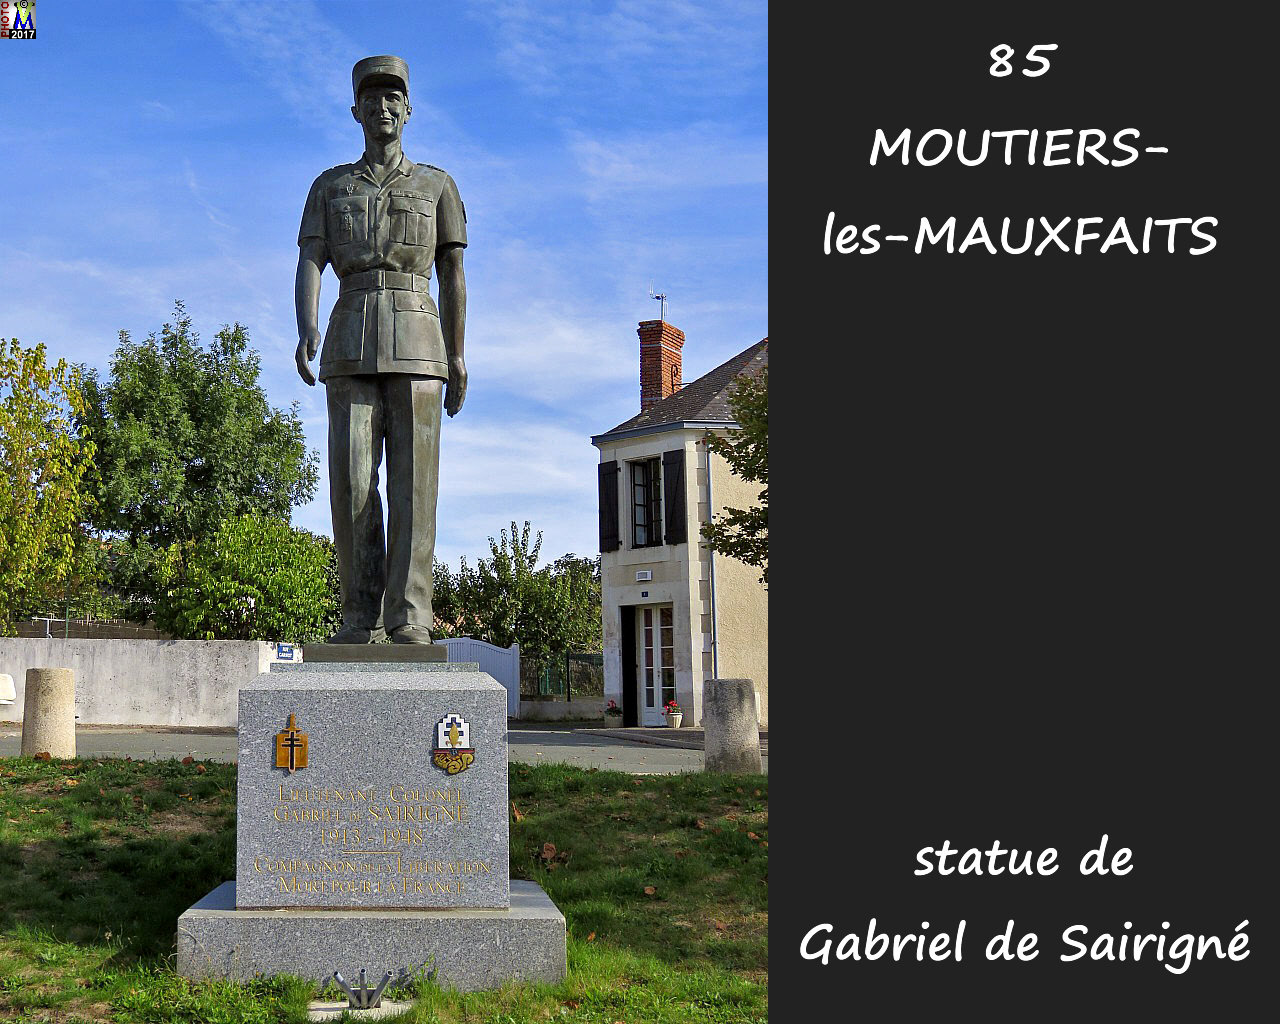 85MOUTIERS-MAUXFAITS_monument_1000.jpg